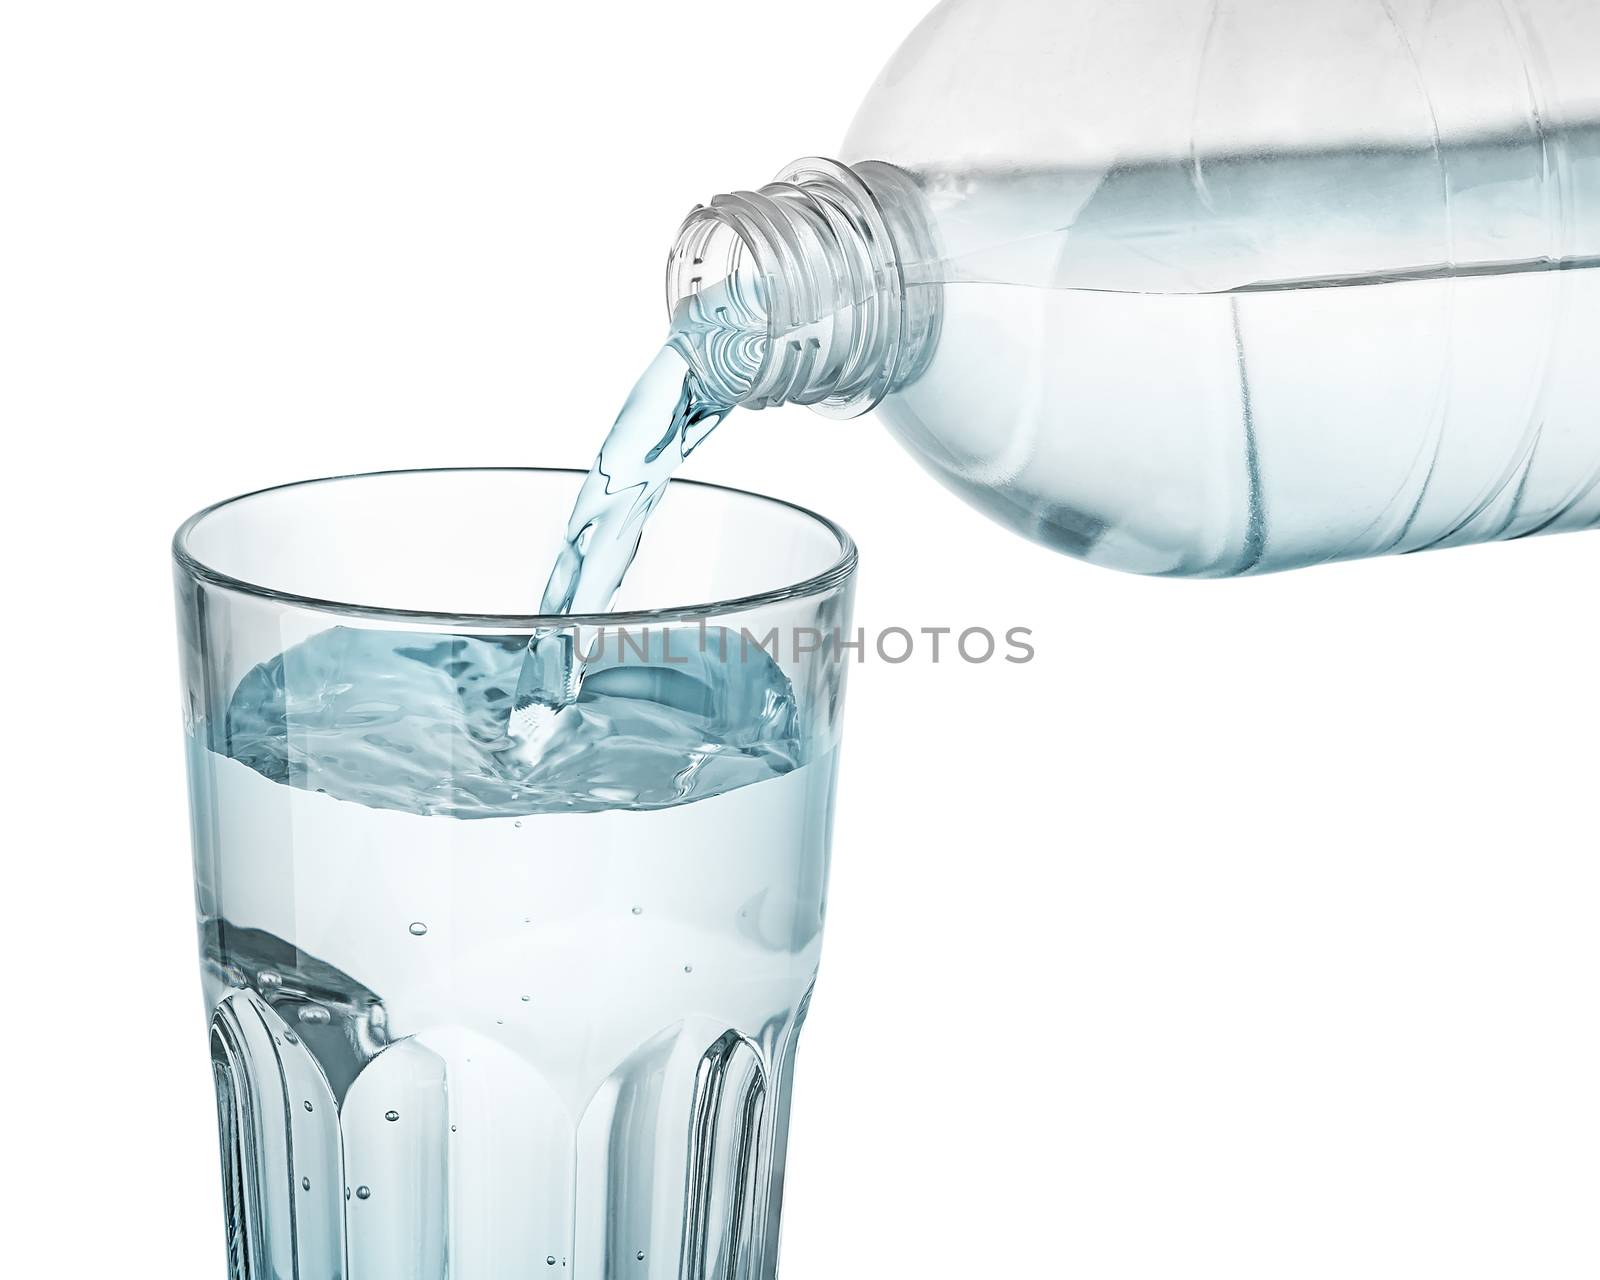 Water is poured into a glass. Plastic bottle. Isolated on white background.